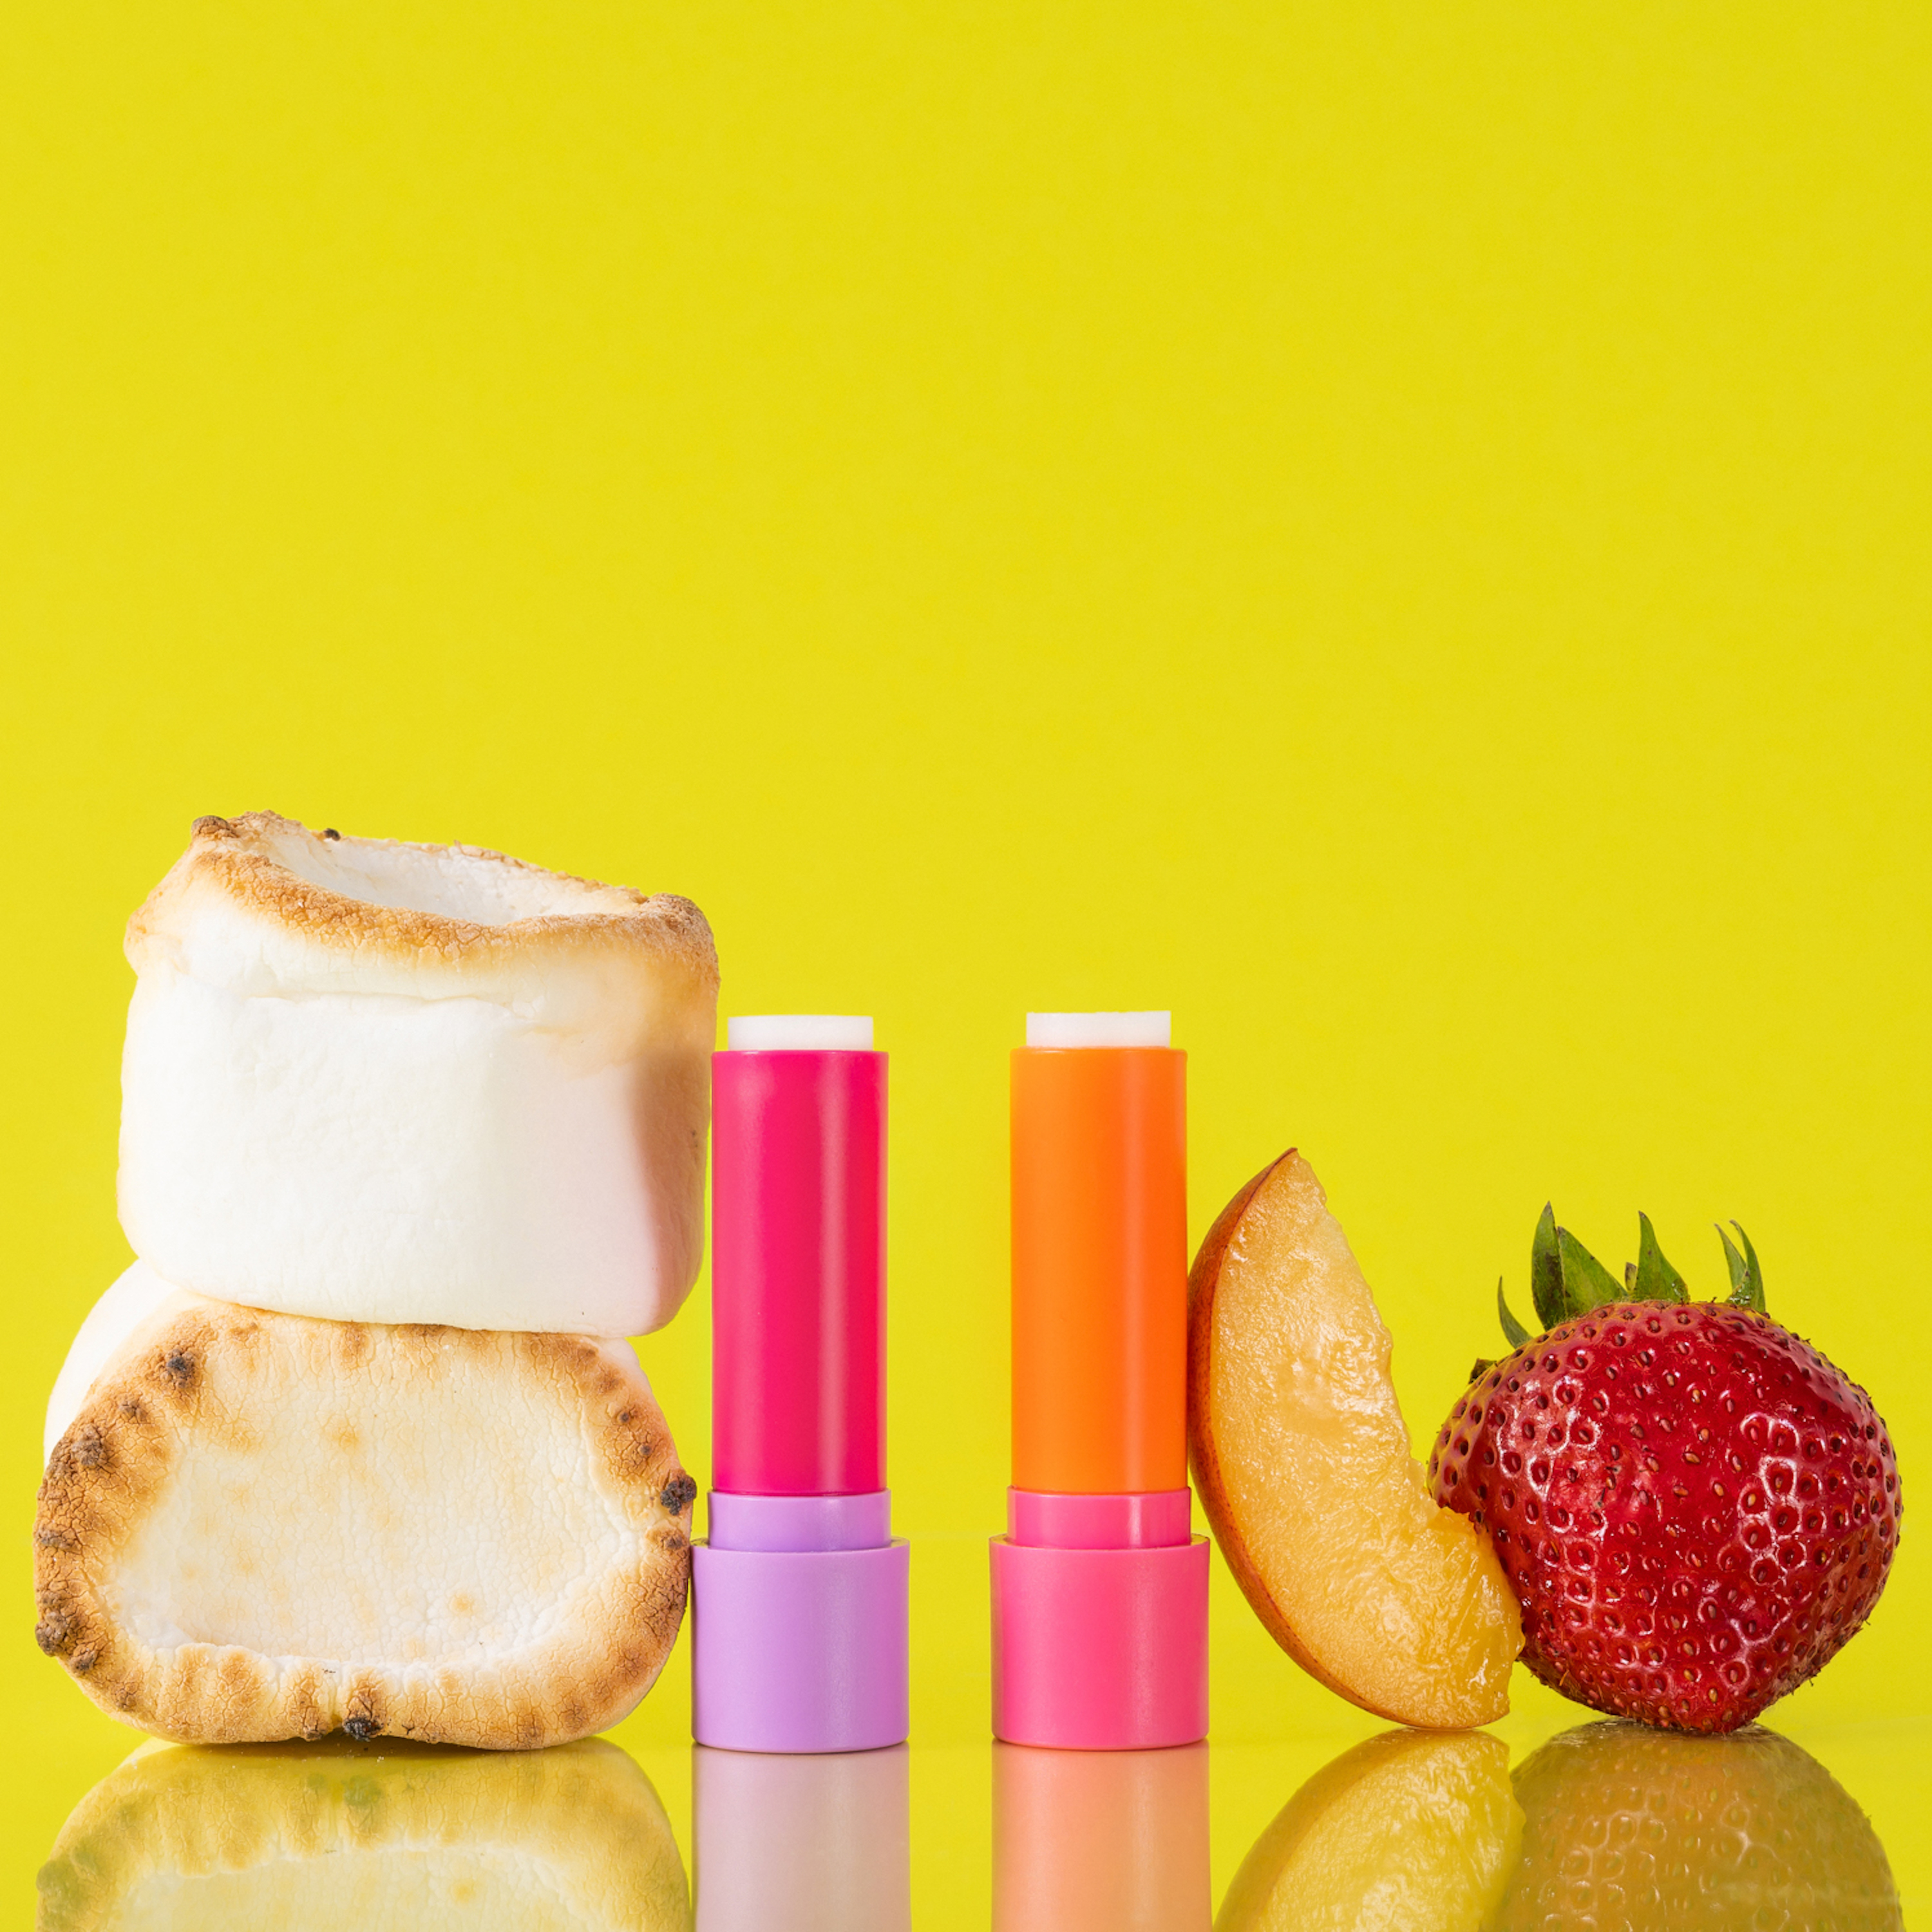 eos Super Soft Shea Lip Balm Stick - Strawberry Peach and Toasted Marshmallow | 0.14 oz | 2 count - image 4 of 10